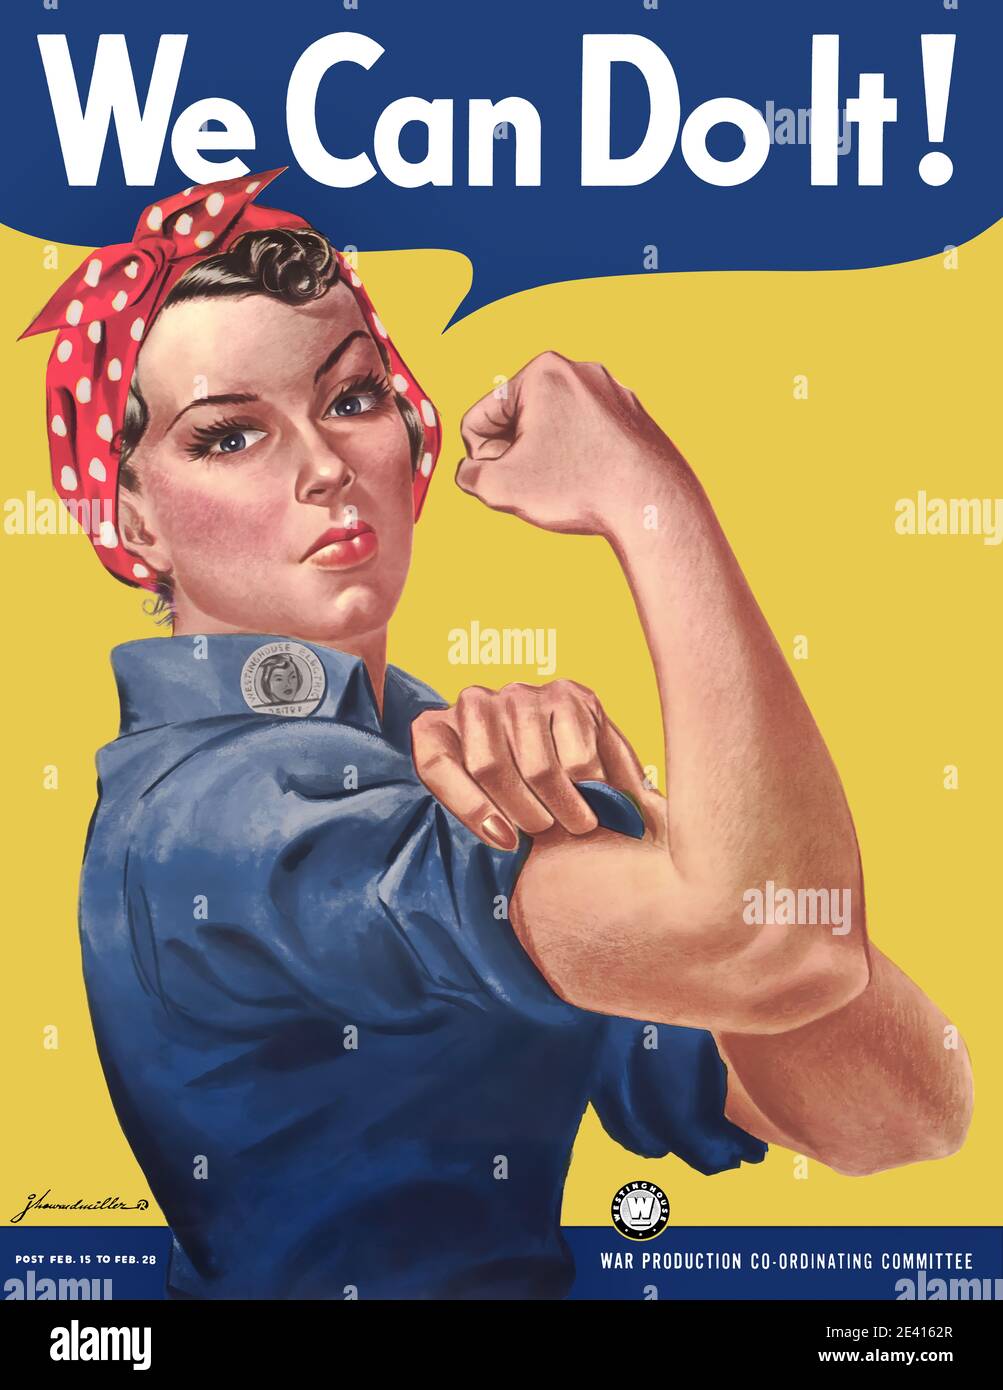 Rosie the Riveter American media icon associated with female defense workers during World War II.  Women workforce symbol we can do it poster Stock Photo